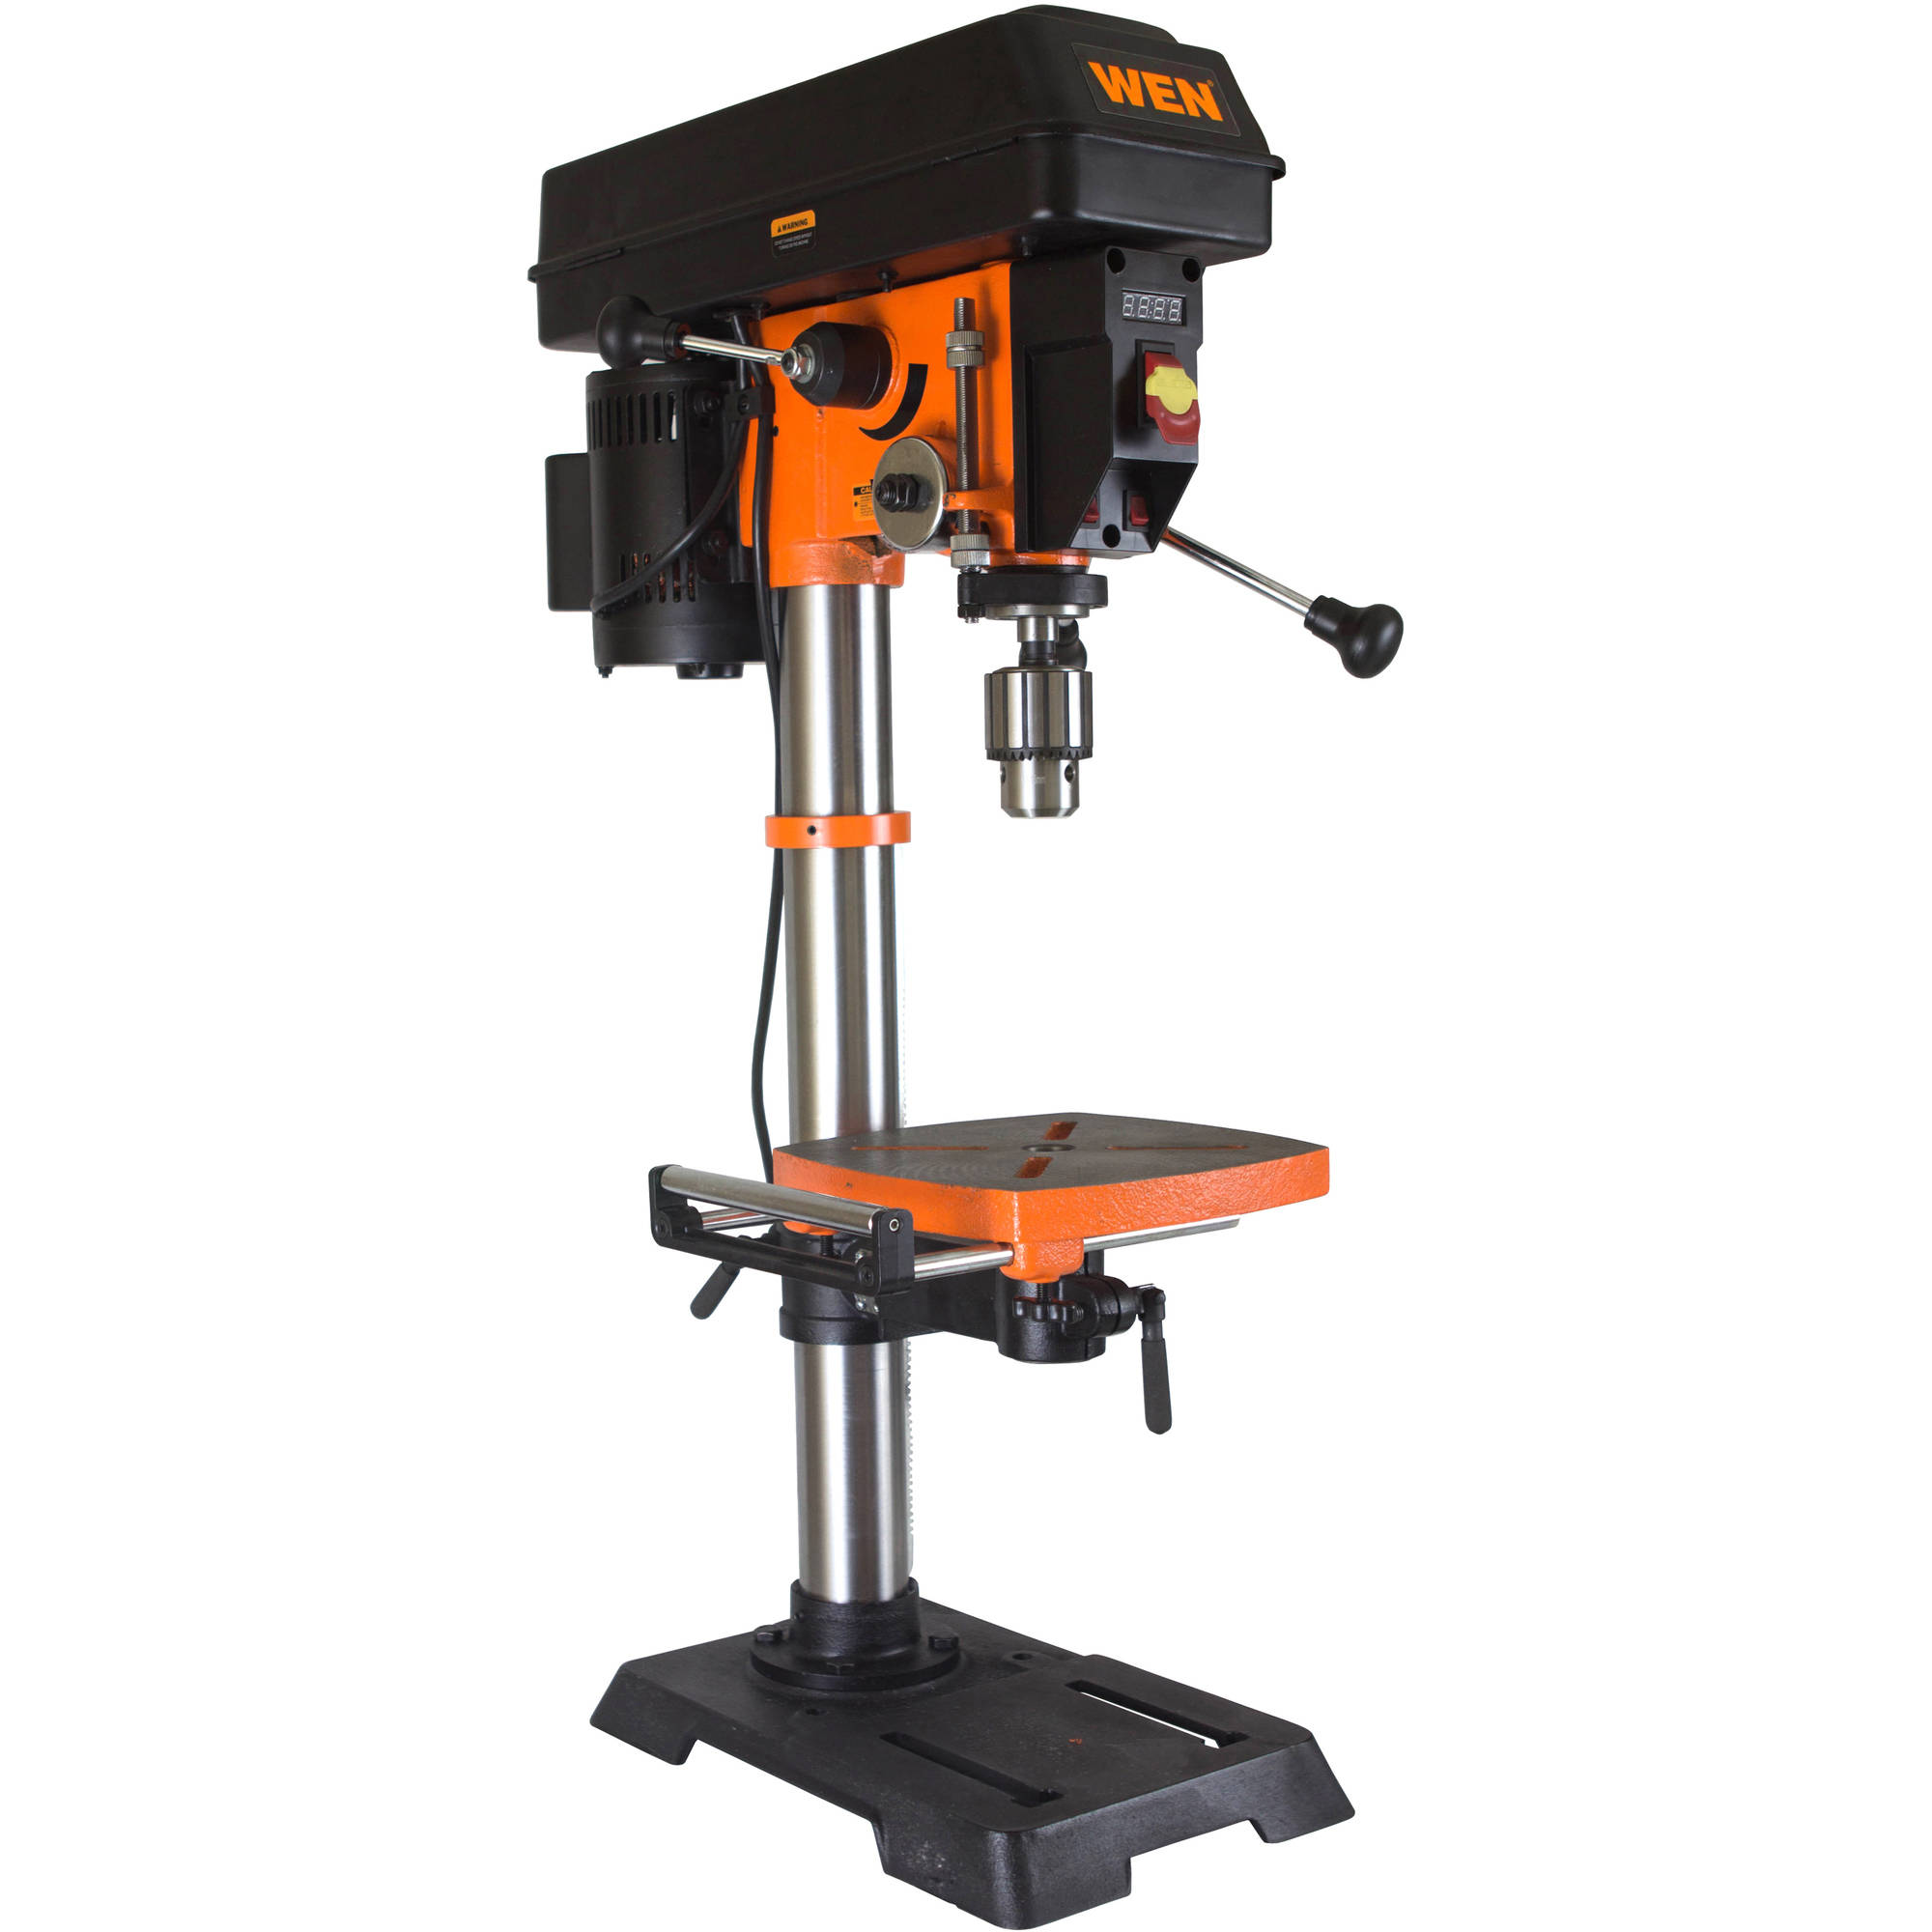 WEN 5-Amp 12-Inch Variable Speed Cast Iron Benchtop Drill Press with Laser and Work Light - image 1 of 6